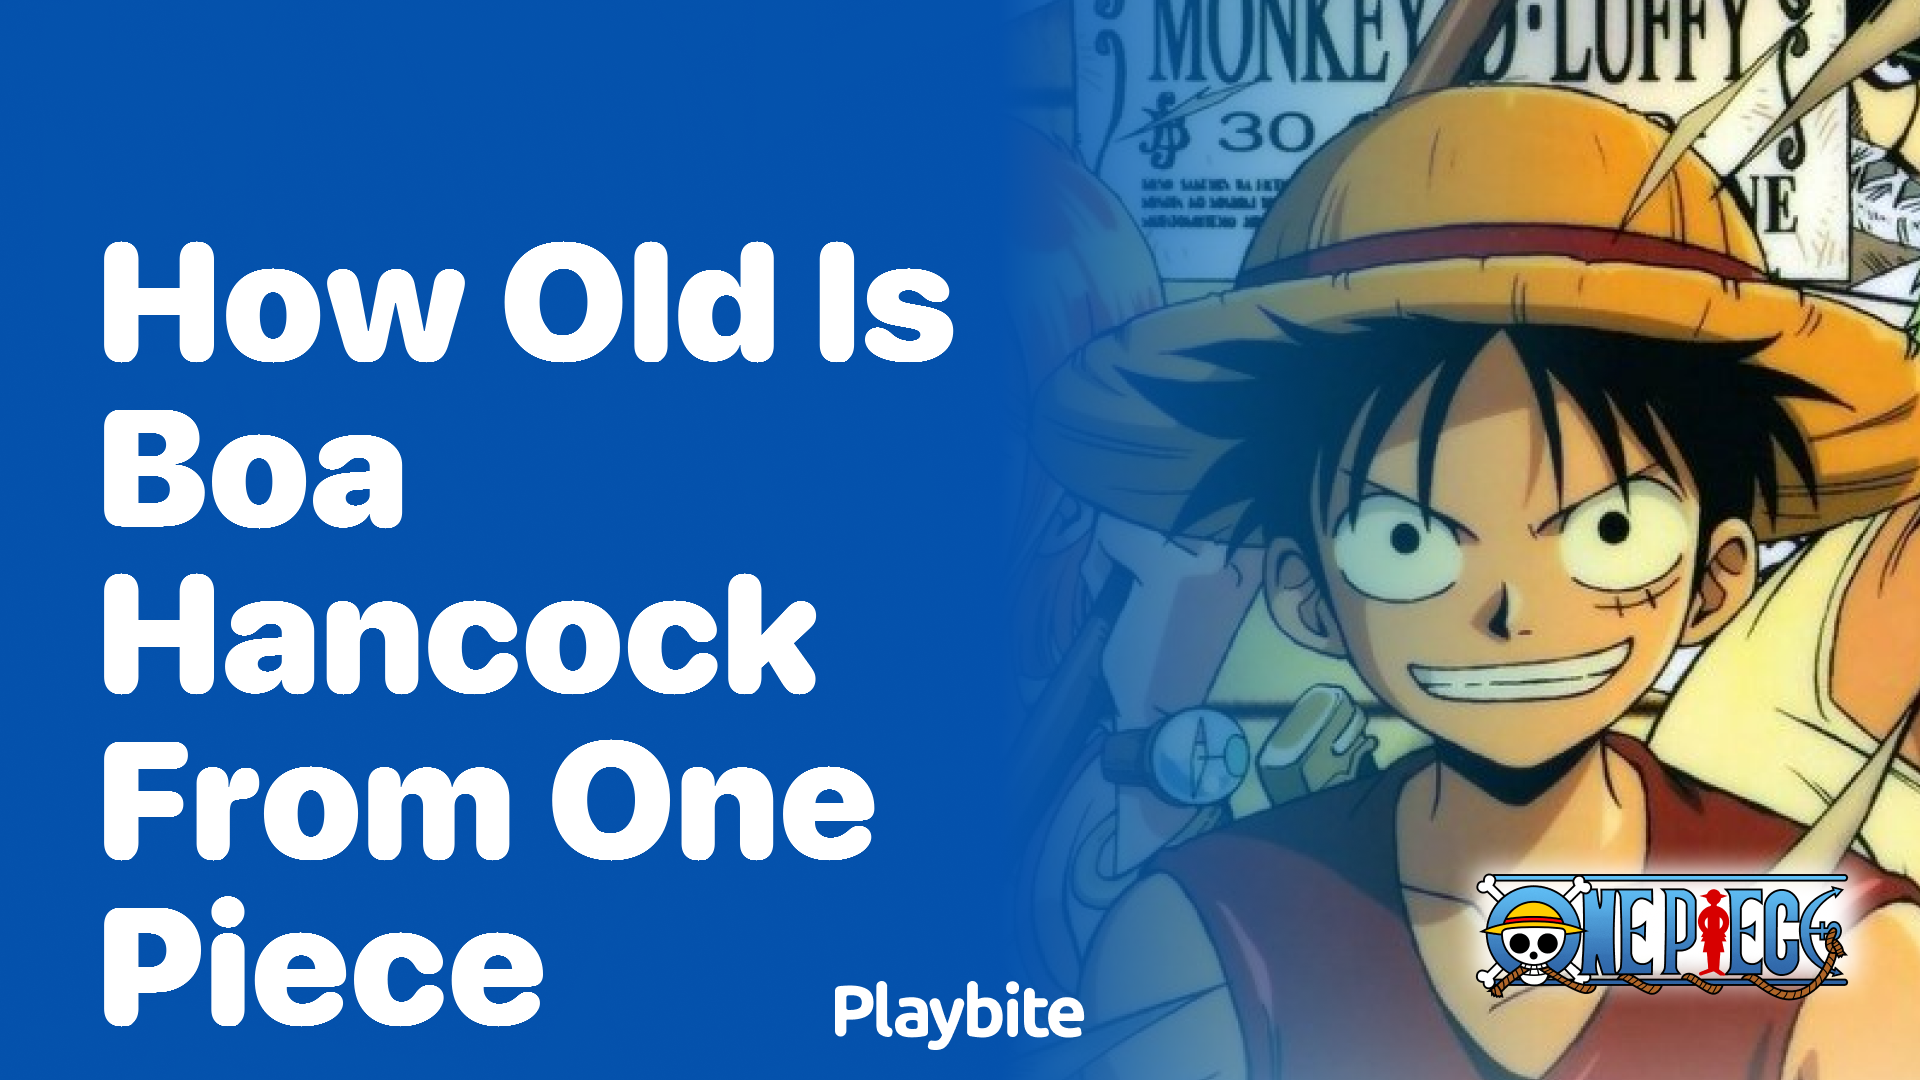 How Old Is Boa Hancock from One Piece?